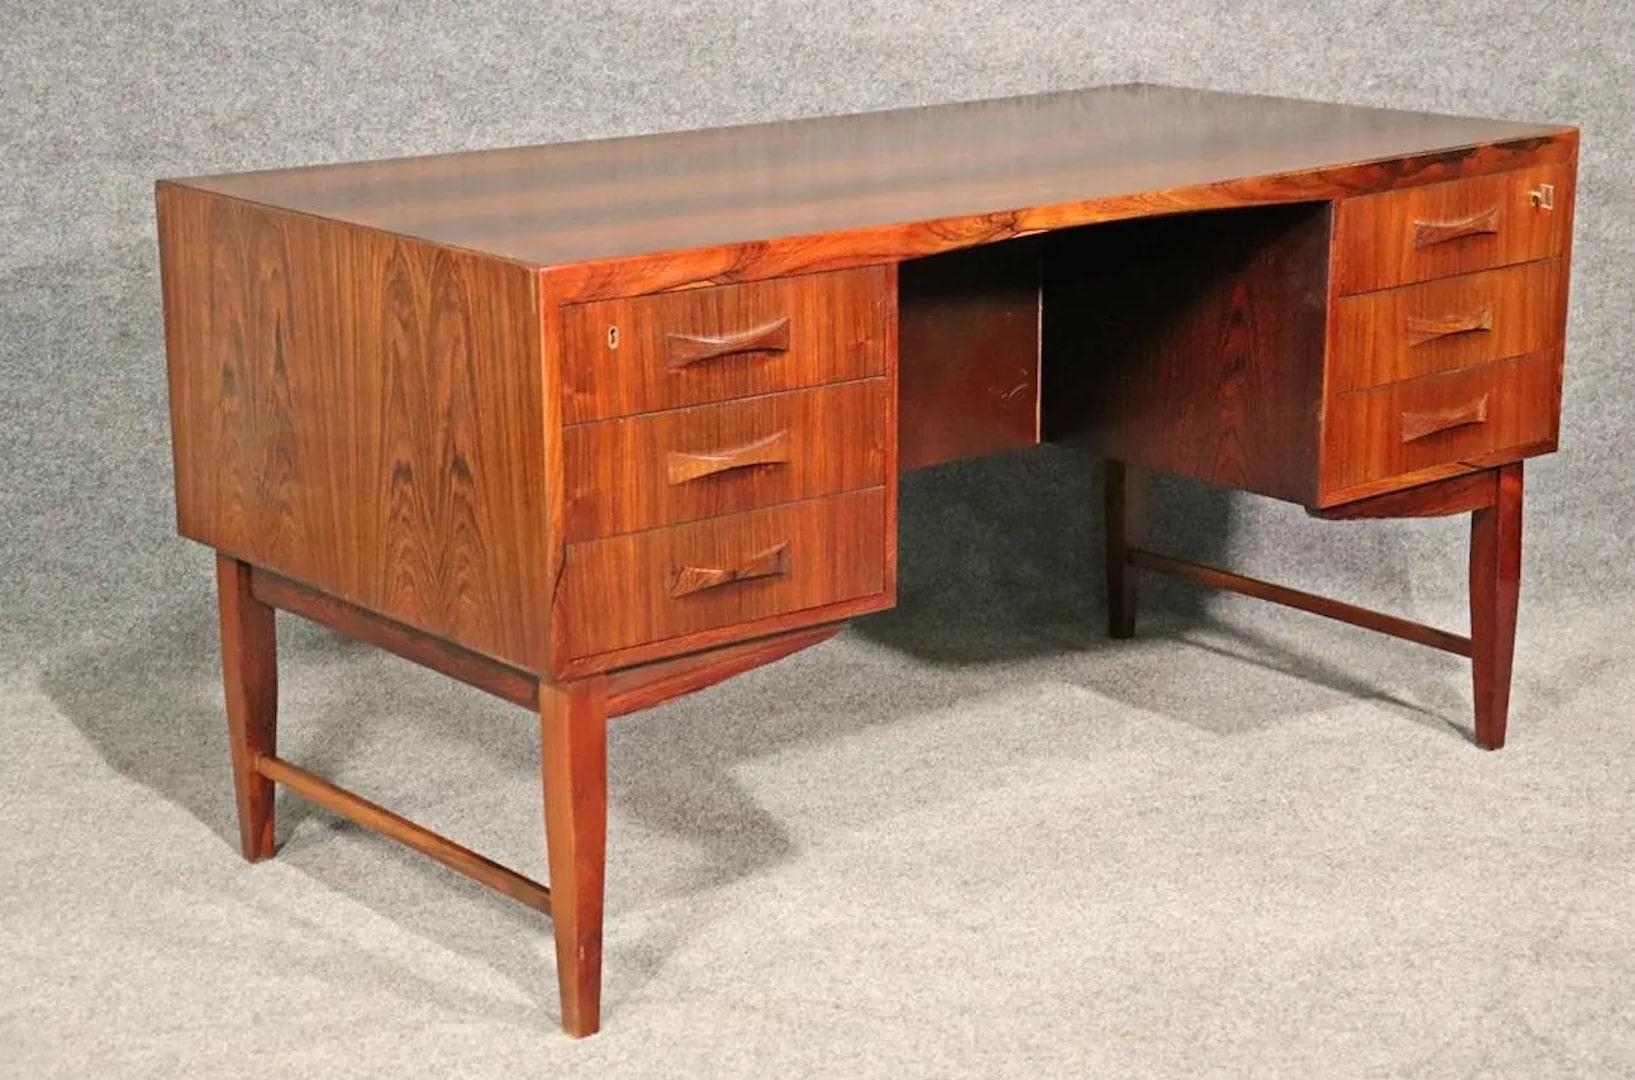 Mid-Century Modern desk in rosewood with finished back. Beautiful office desk featuring bowtie handles, stunning rosewood grain and finished back with cabinet storage.
Please confirm location.